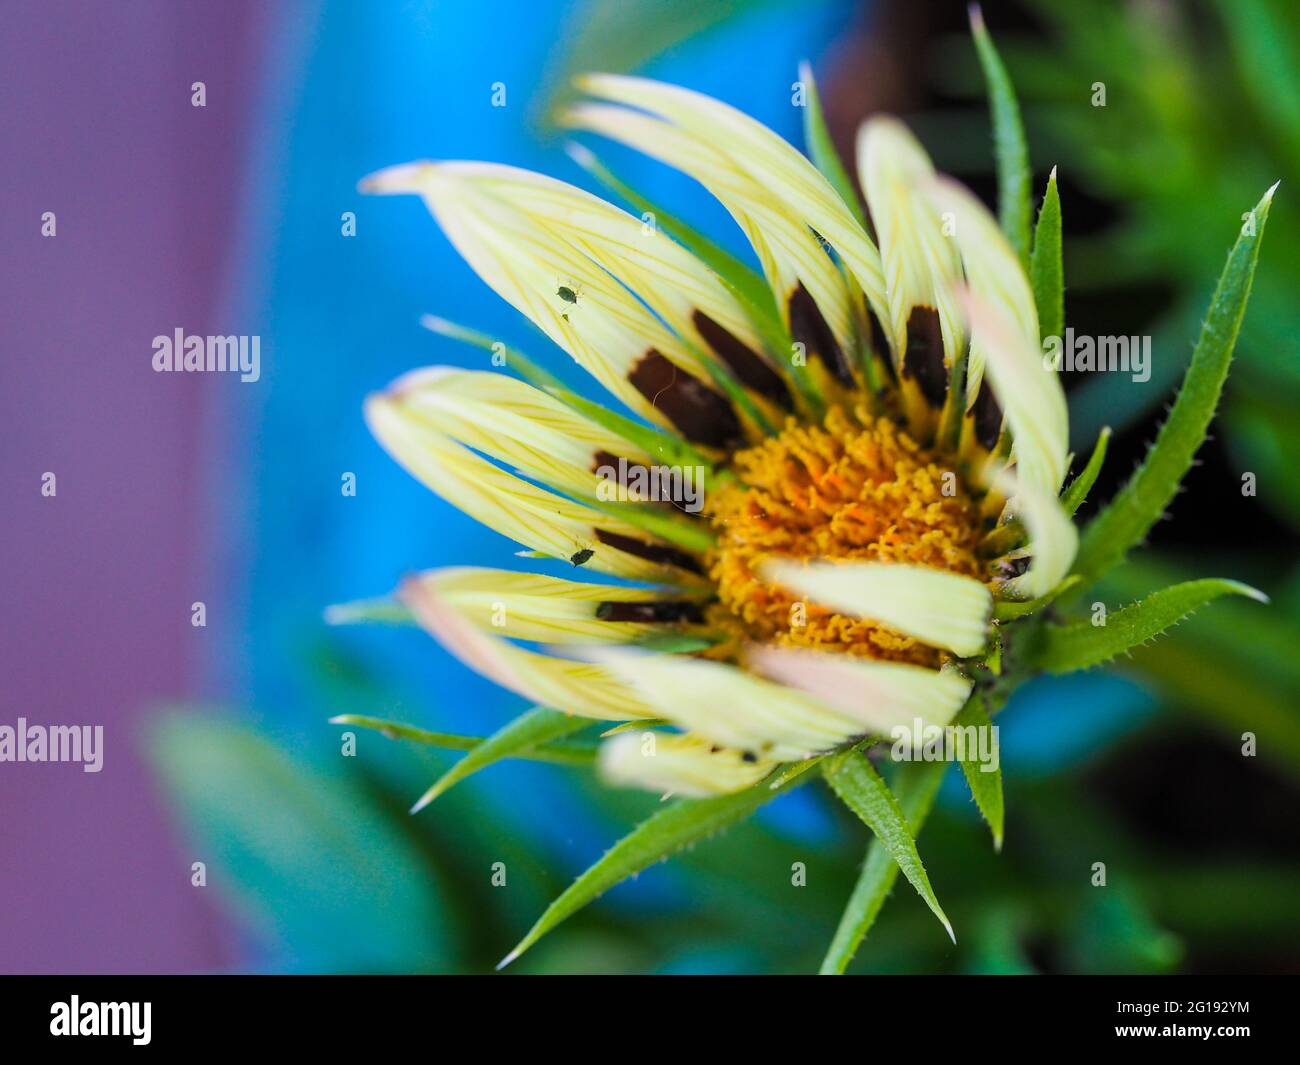 Macro, Pale yellow petals, brown inner petals, beautiful Gazania Daisy Flower surrounded by wiry green involucre bracts, opening. Blue purple green Stock Photo